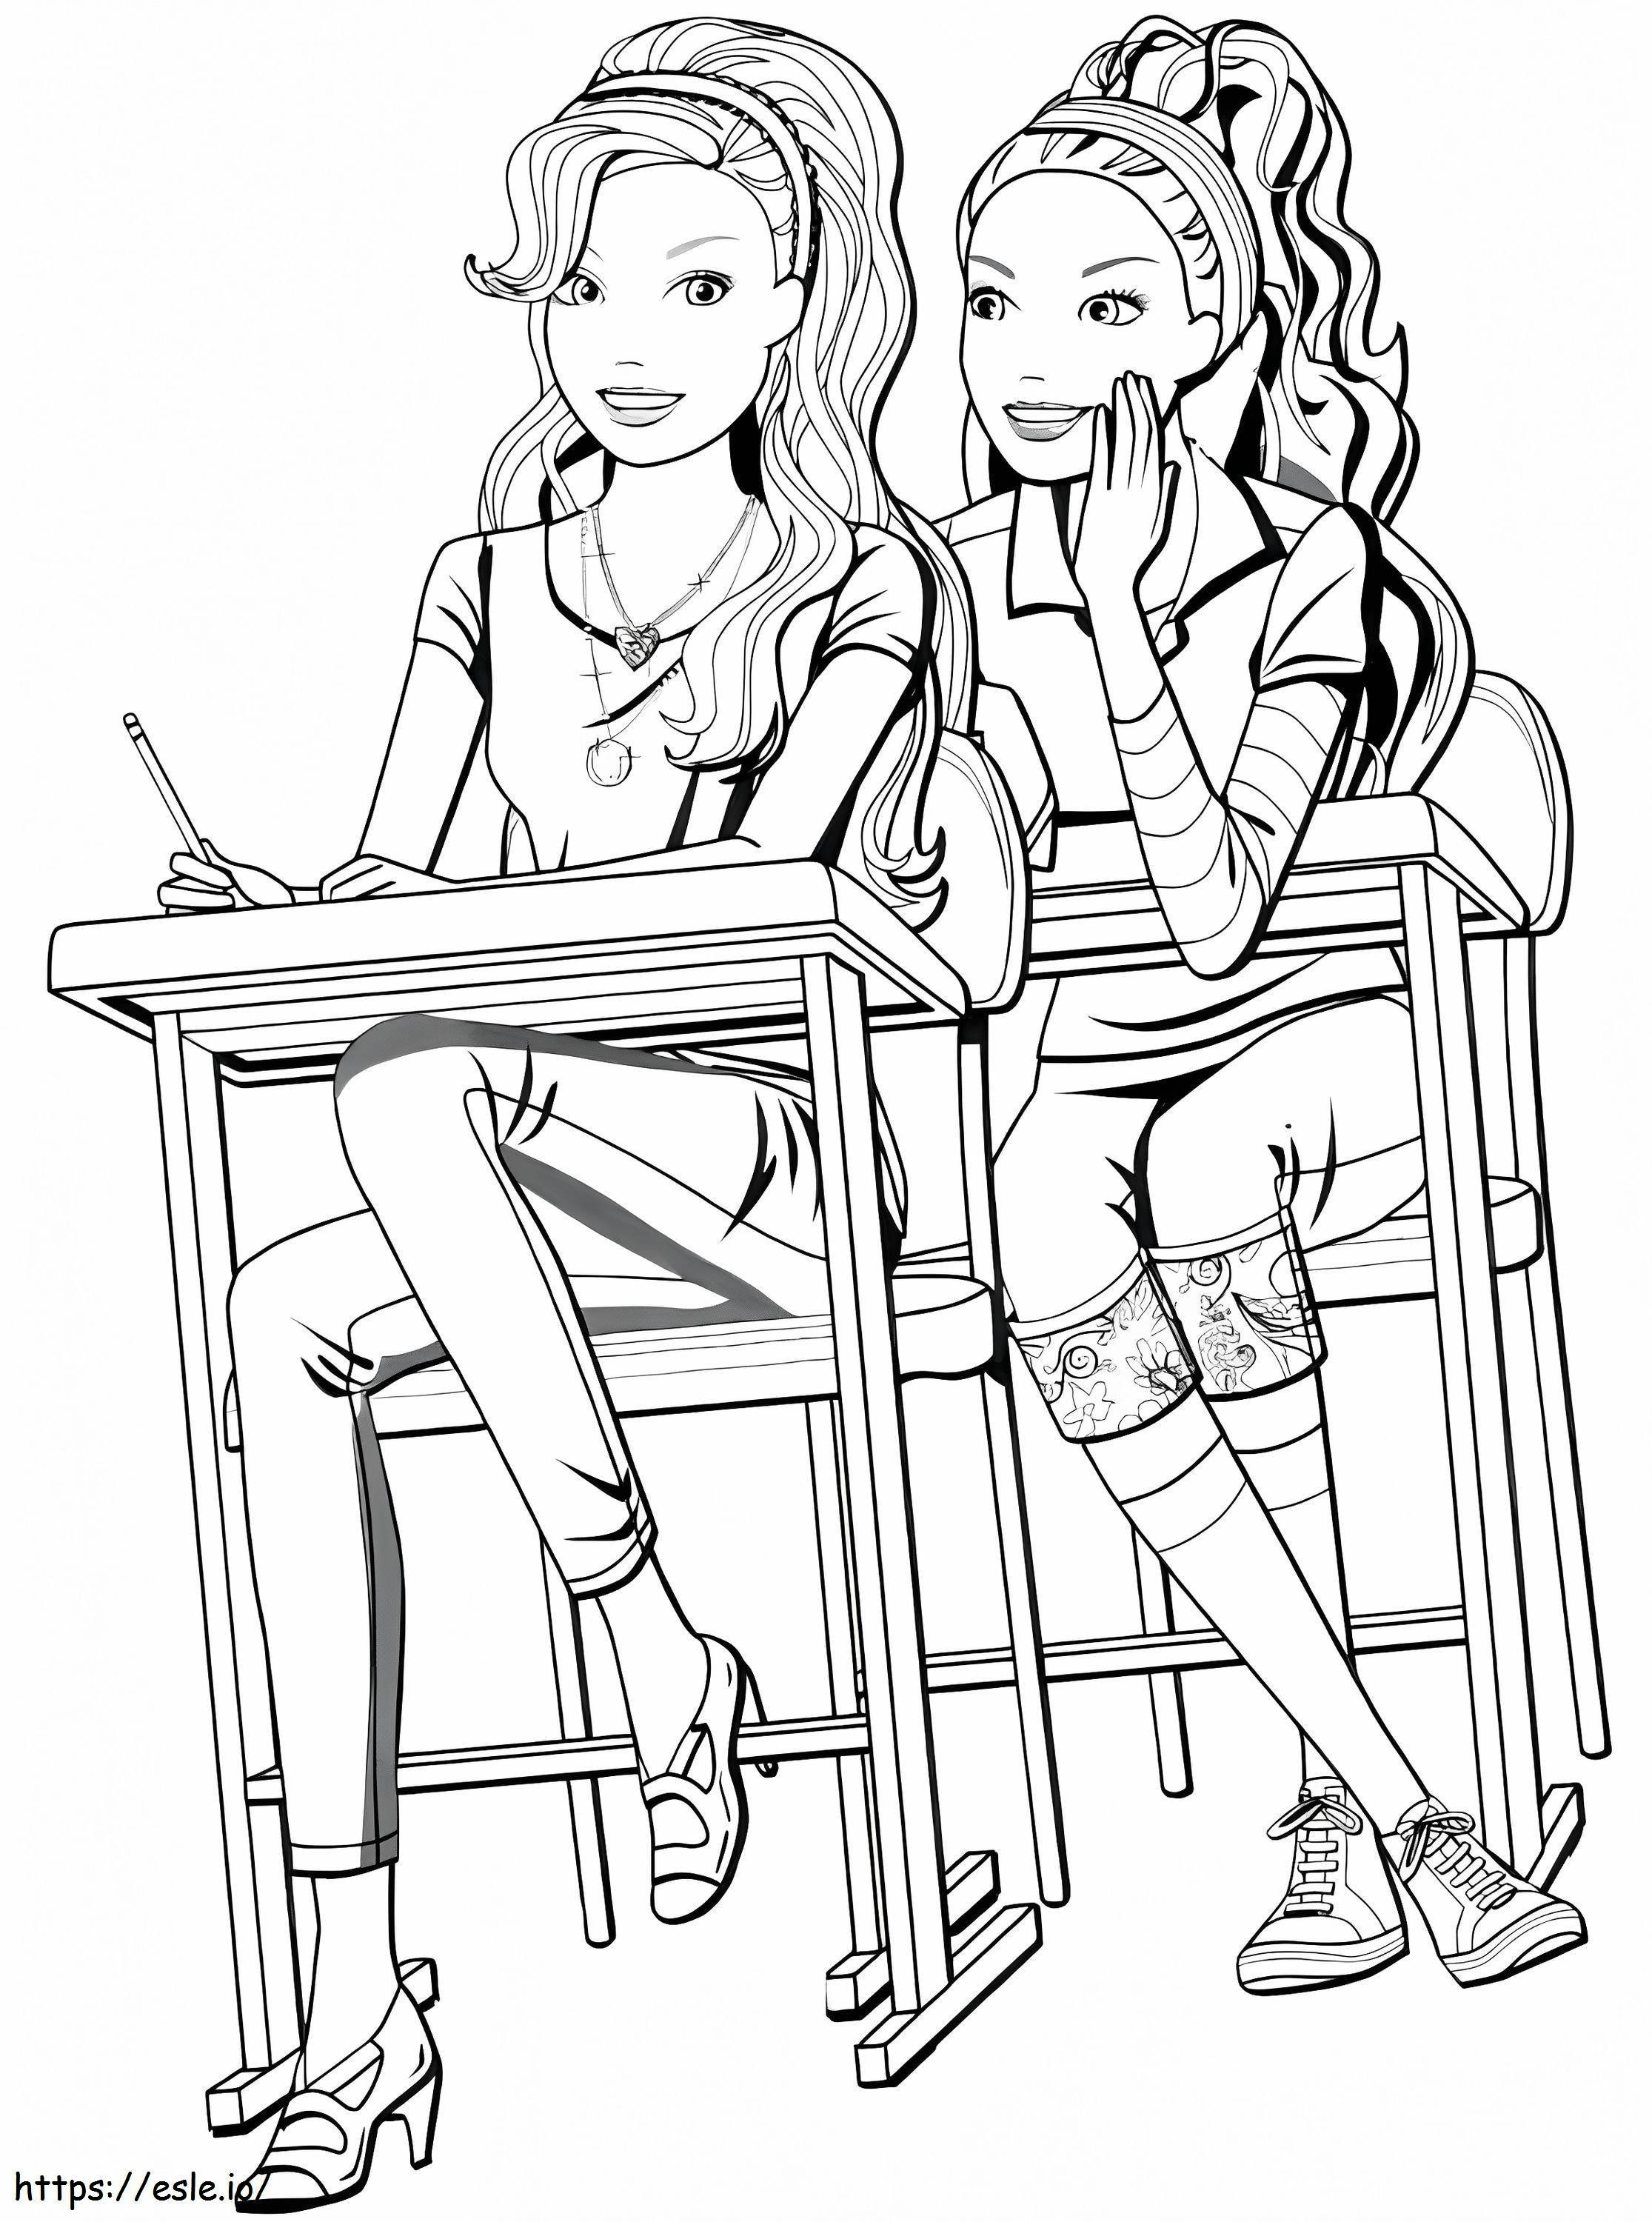 Best Friends At School coloring page